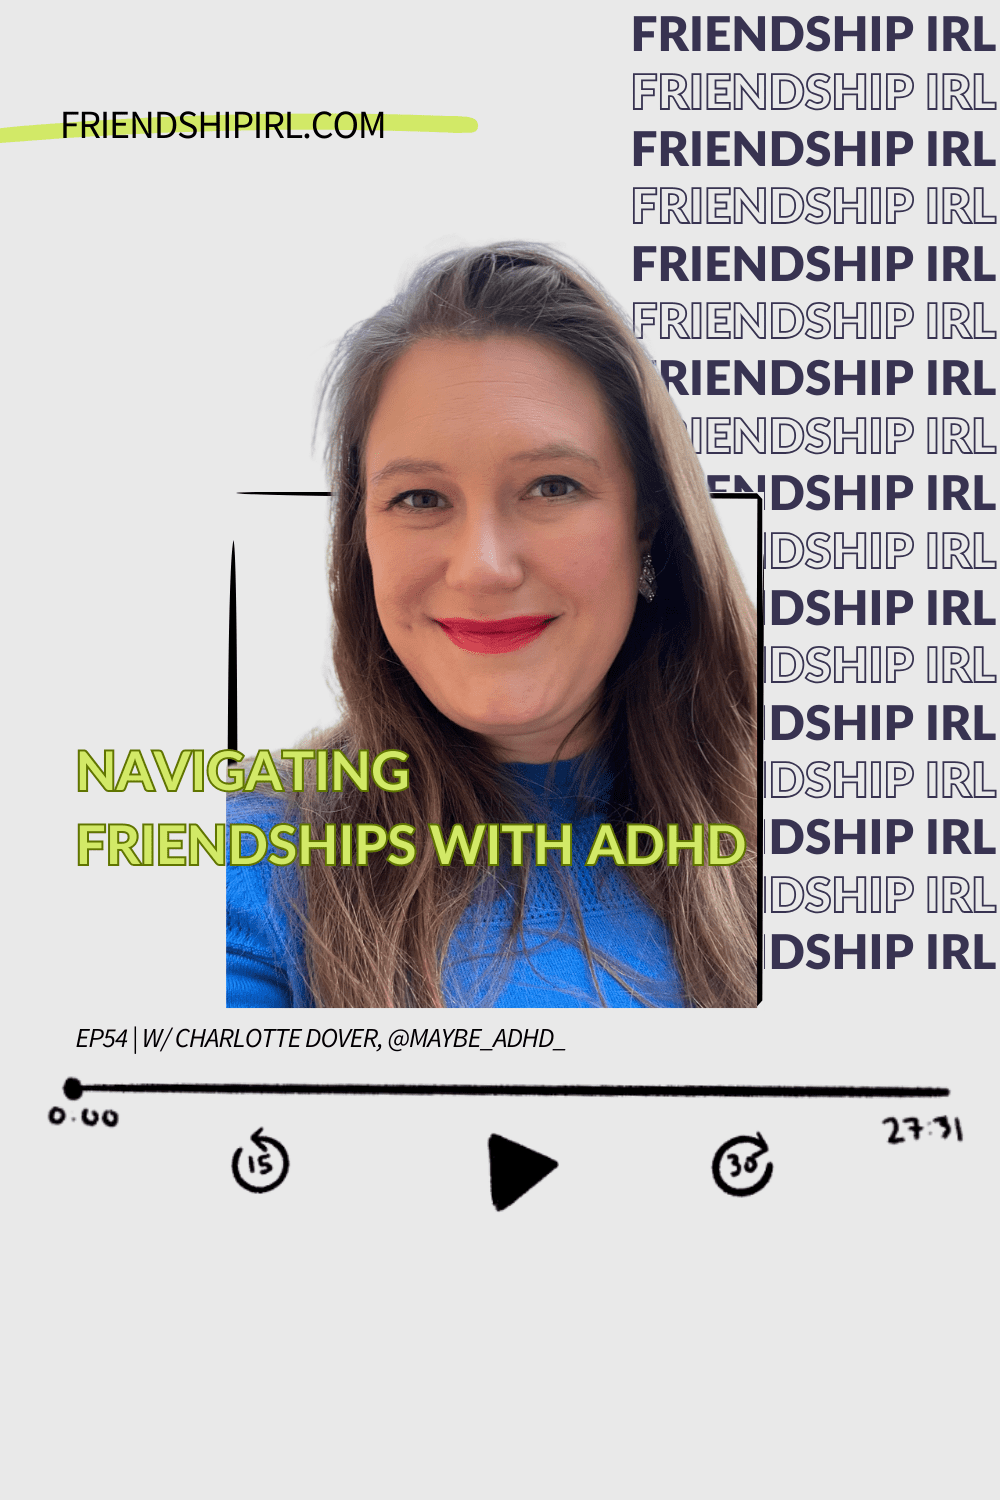 Friendship IRL Podcast - Episode 54 - Navigating Friendships With ADHD